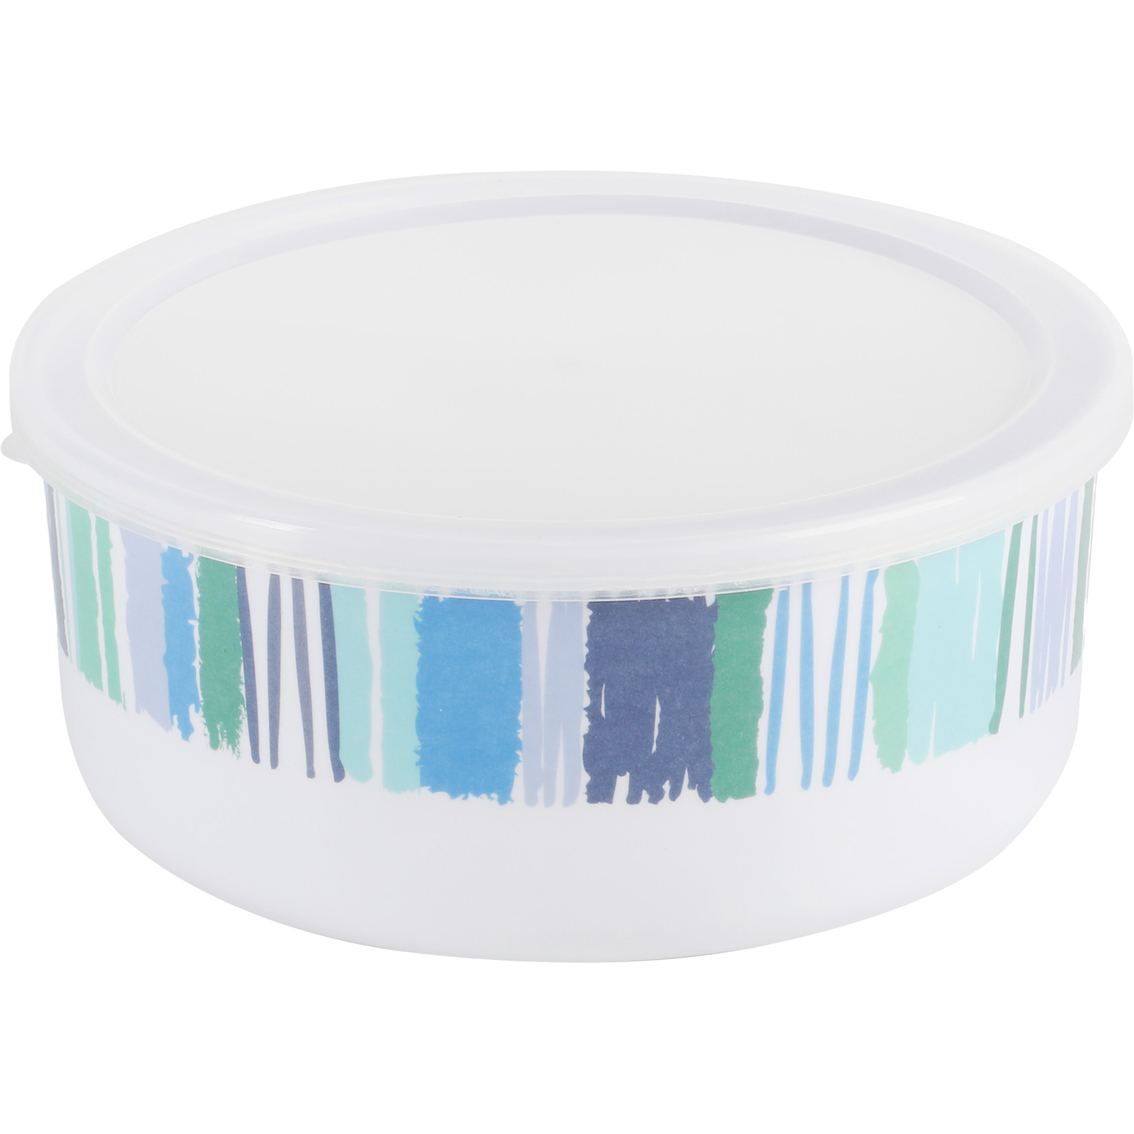 Gibson Home Tropical Sway Orleans Blue 3 pc. Storage Bowl Set, White Acrylic - Image 3 of 4